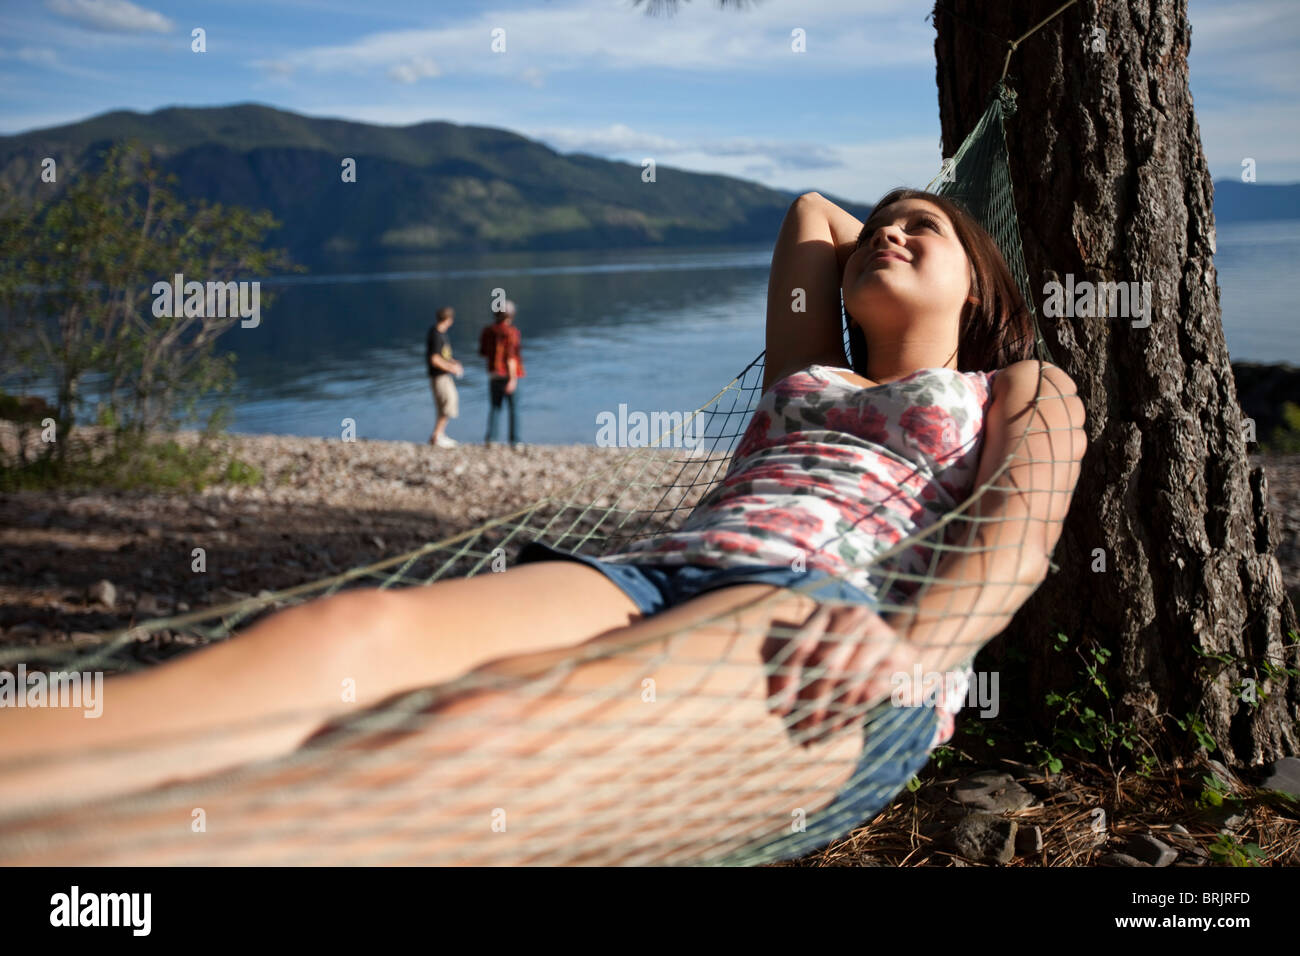 A women relaxes in a hammock with her friends skipping rocks on a lake in Idaho. Stock Photo